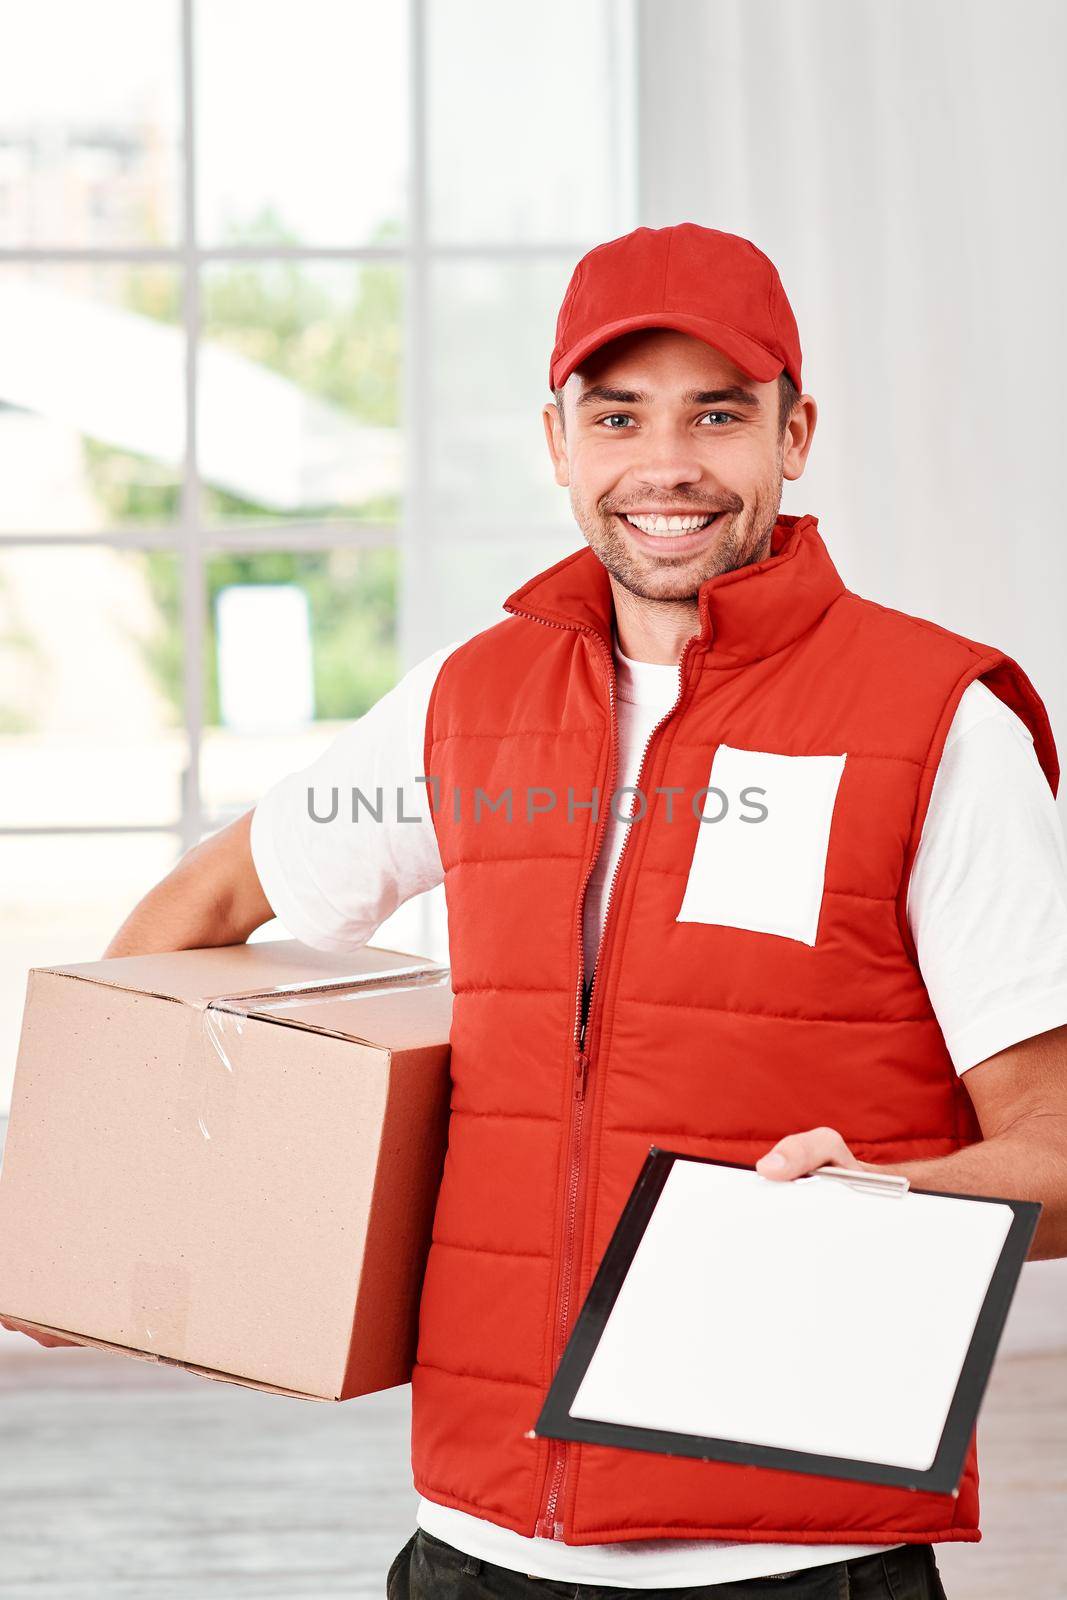 Cheerful postman wearing red postal uniform is delivering parcel to a client. He holds carton box, waiting for a signature on delivery and looking at the camera with a smile. Friendly worker, high quality delivery service. Indoors. Bright interior.